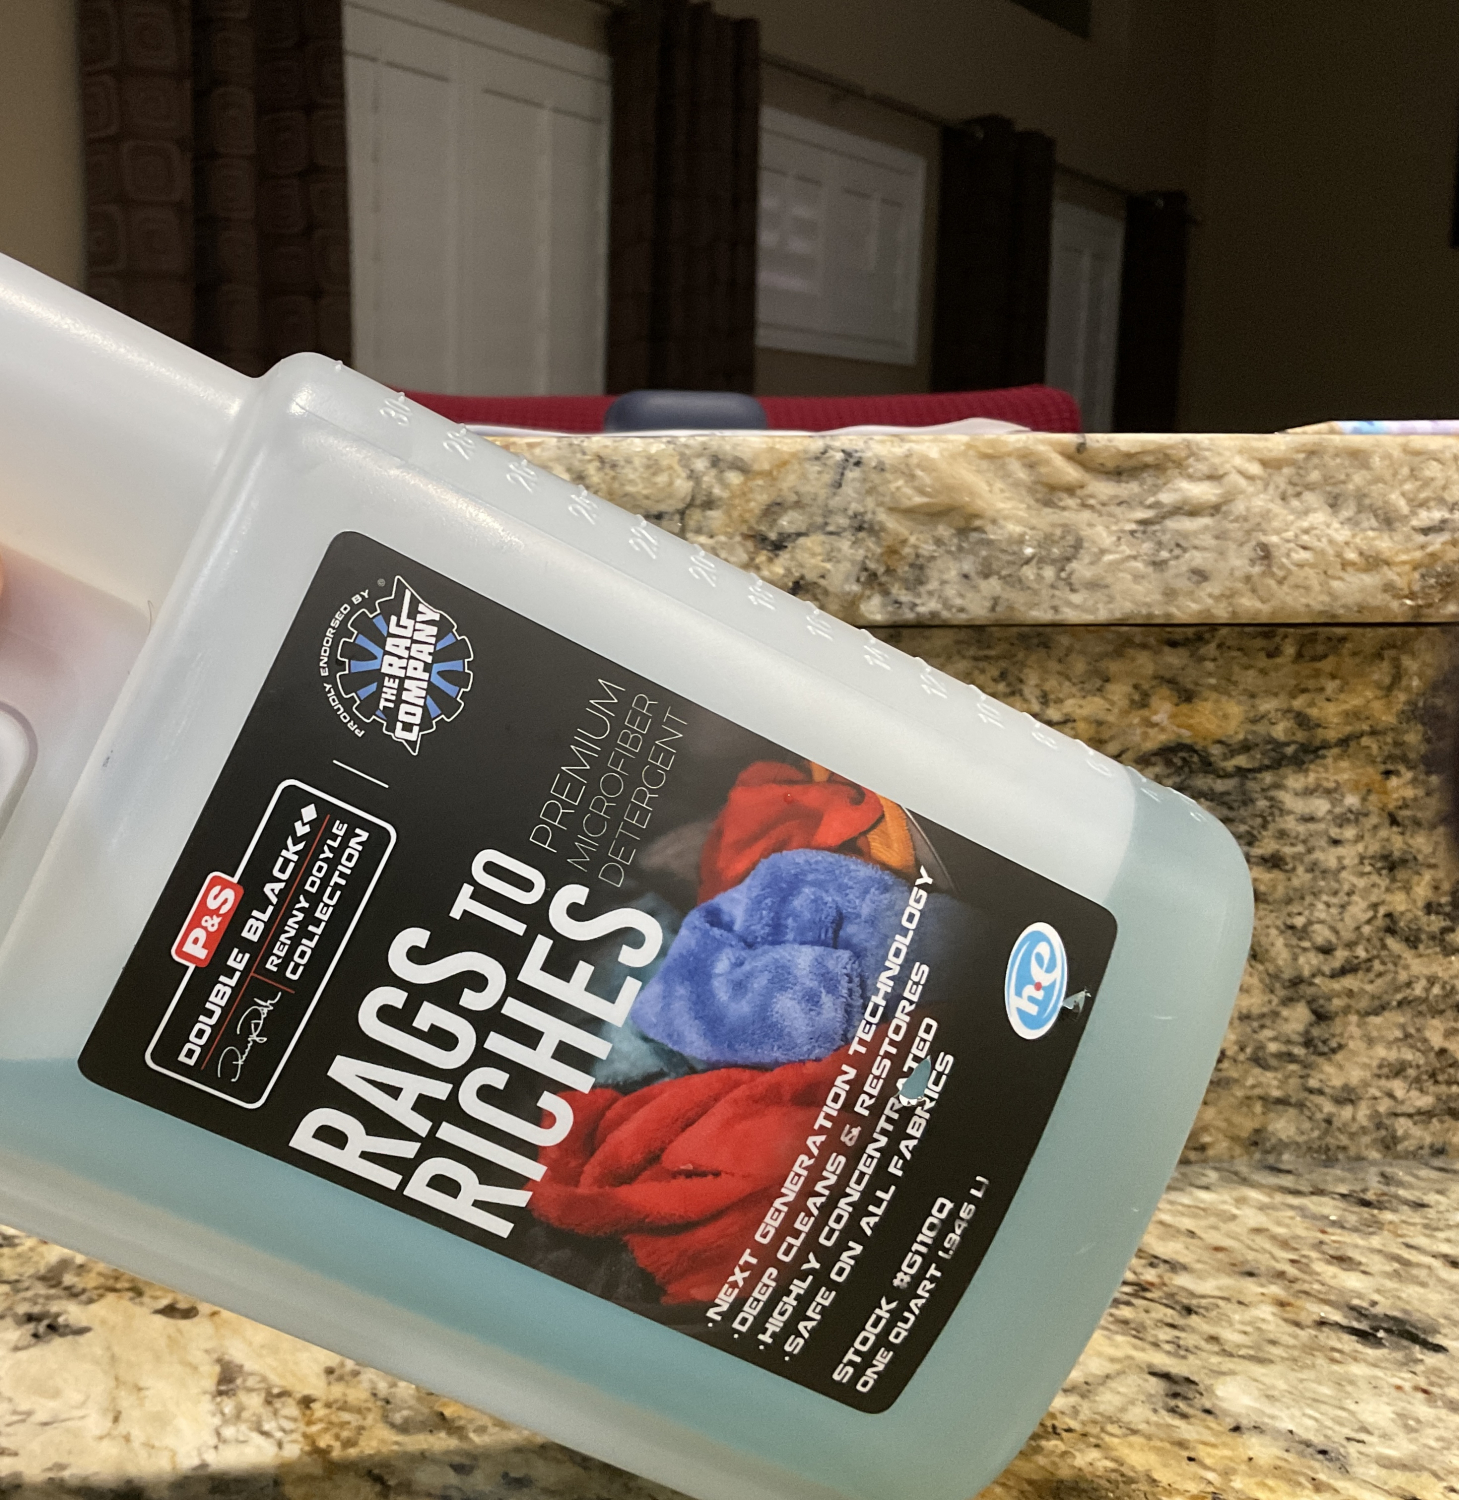  P&S Professional Detail Products - Rags to Riches - Premium Microfiber  Detergent, Deep Cleans and Restores, Safe on All Fabrics, Highly  Concentrated, Next Generation Cleaning Technology (1 Gallon) : Industrial &  Scientific